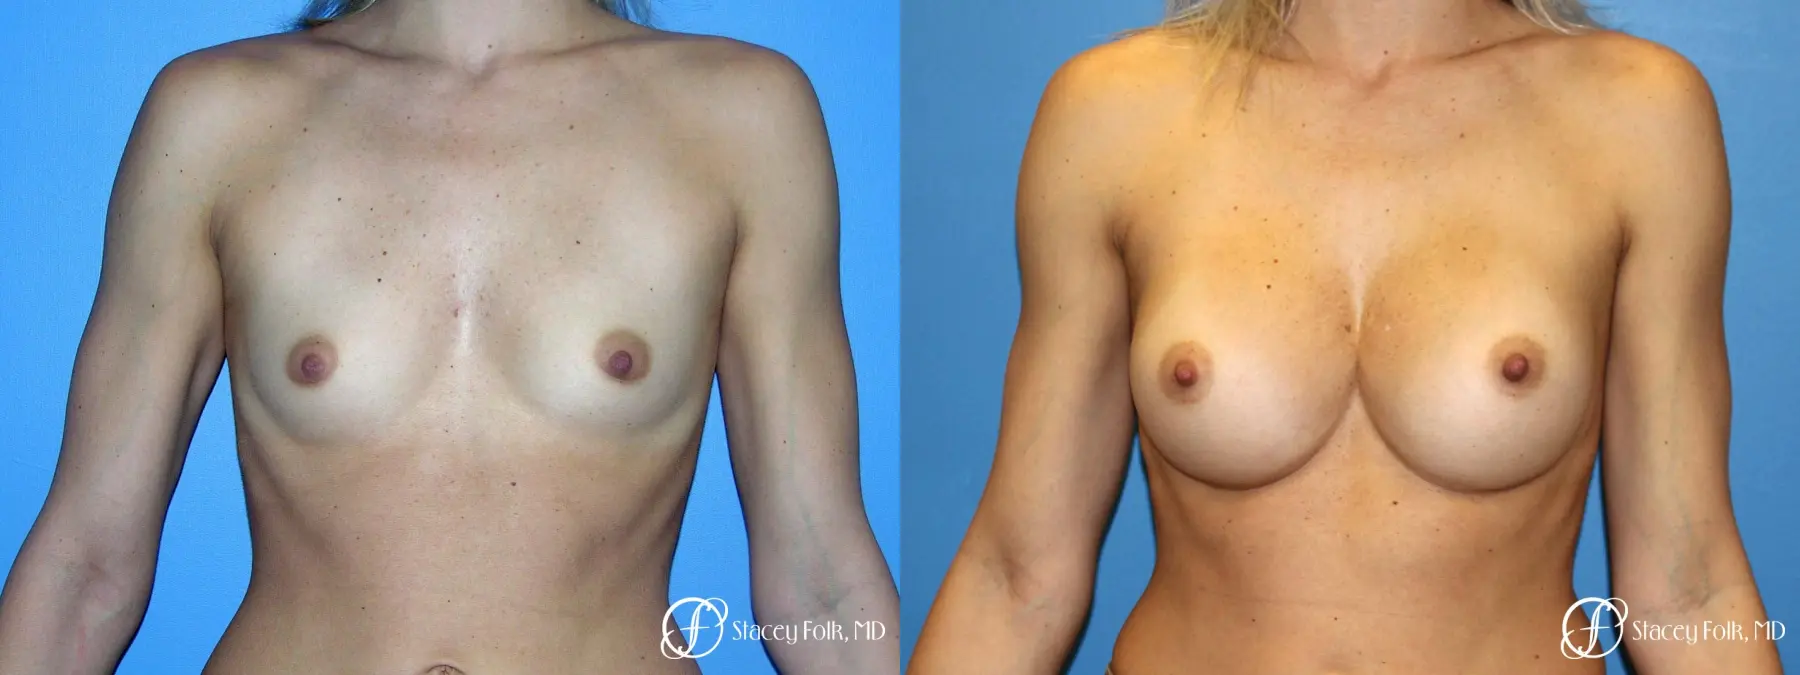 Denver Breast Augmentation 8202 - Before and After